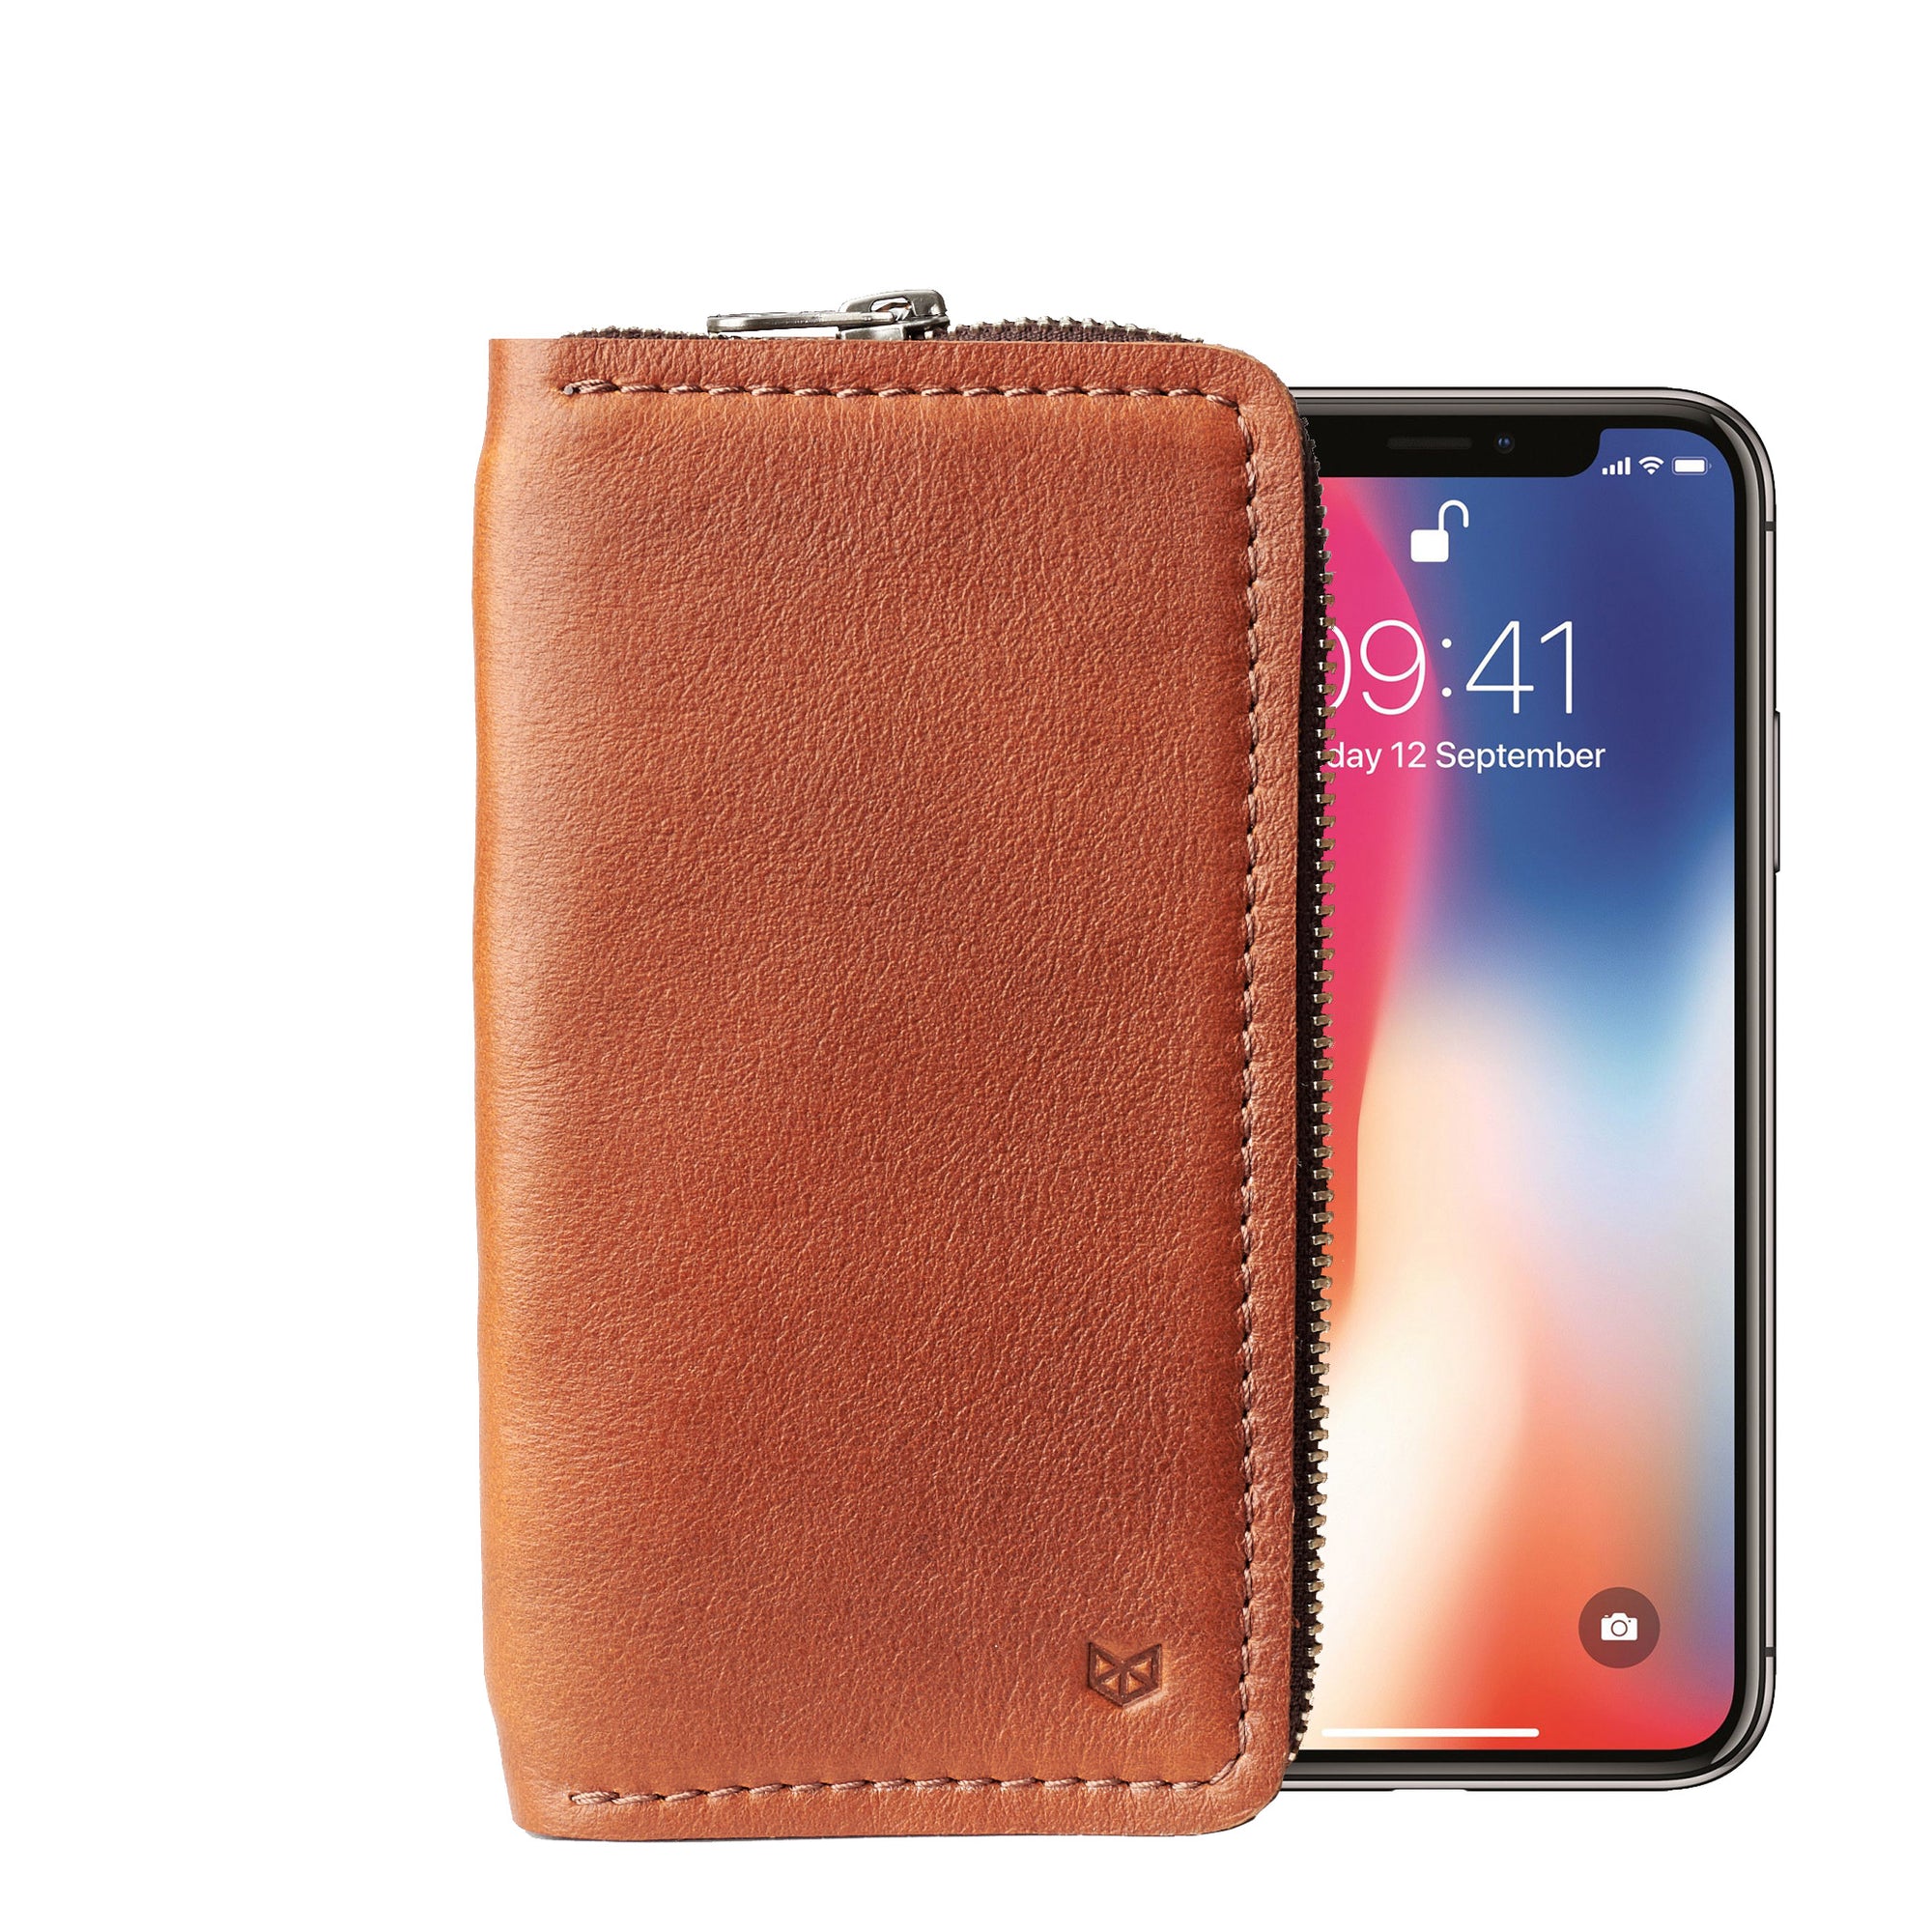 Front view. Tan iPhone leather wallet stand case for mens gifts. iPhone xs, iPhone xs Max, iPhone xr, iPhone x, iPhone 10, iPhone 8 plus leather stand sleeve. Crafted by Capra Leather.